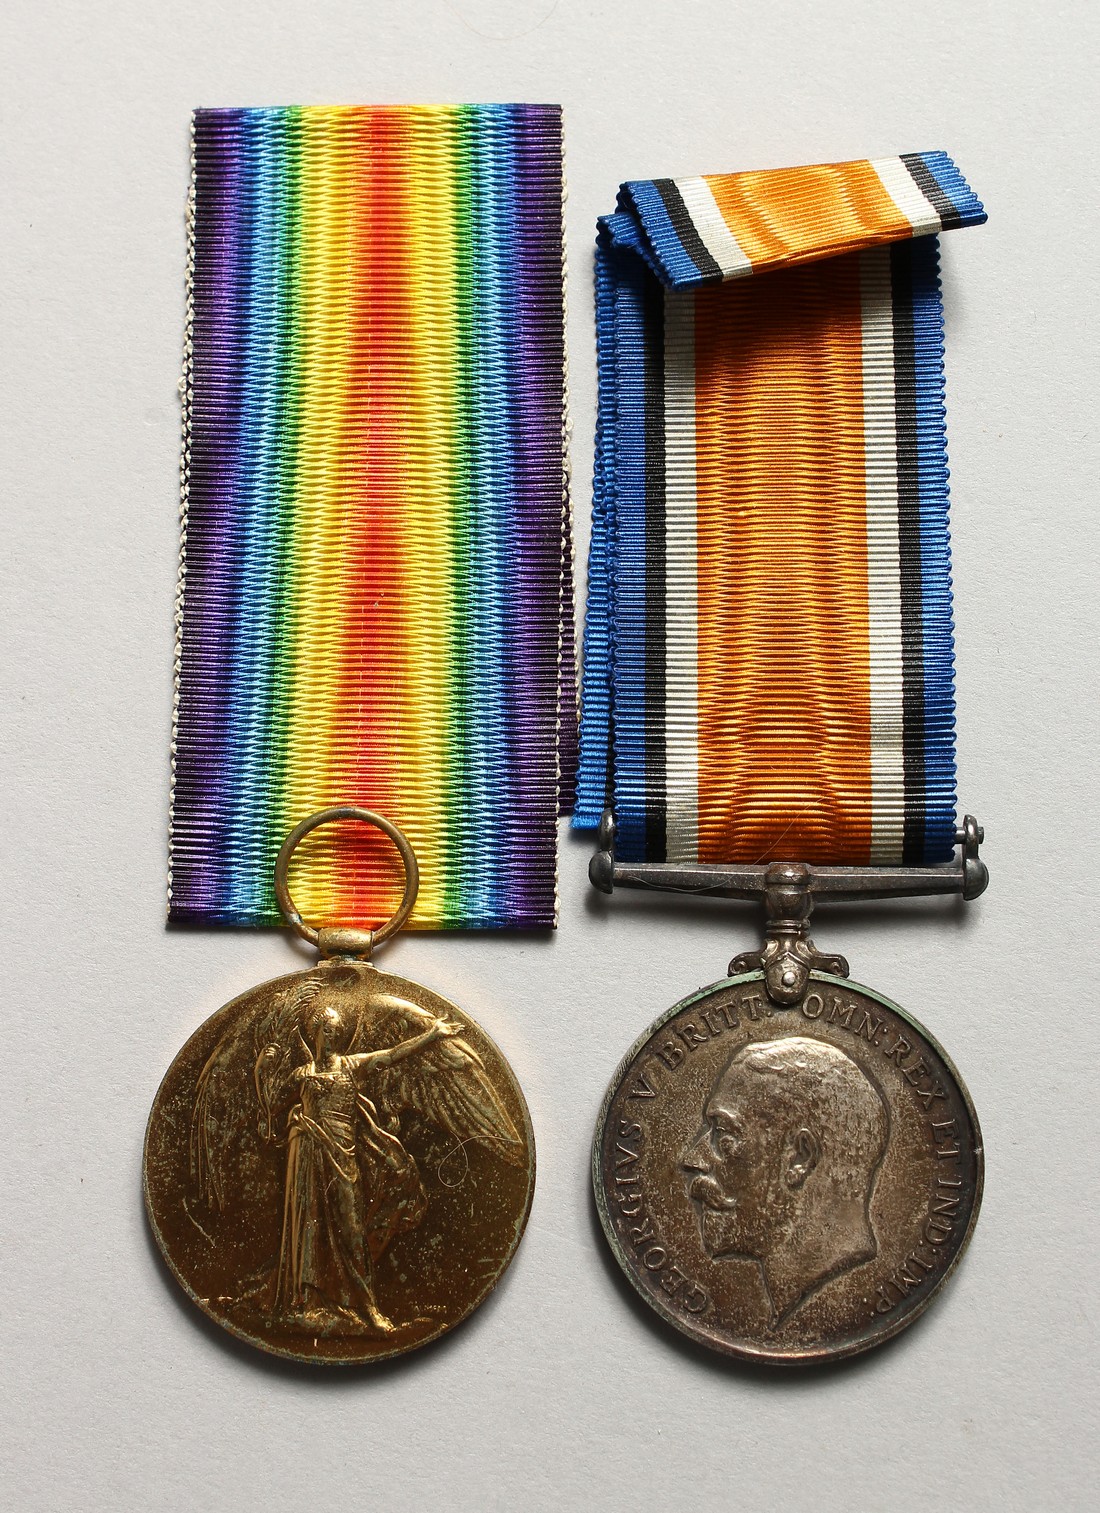 THE MEDALS OF PTE. L. J. PHILLIPS, 23rd LONDON REG. Later 13524. Army Pay Corps.